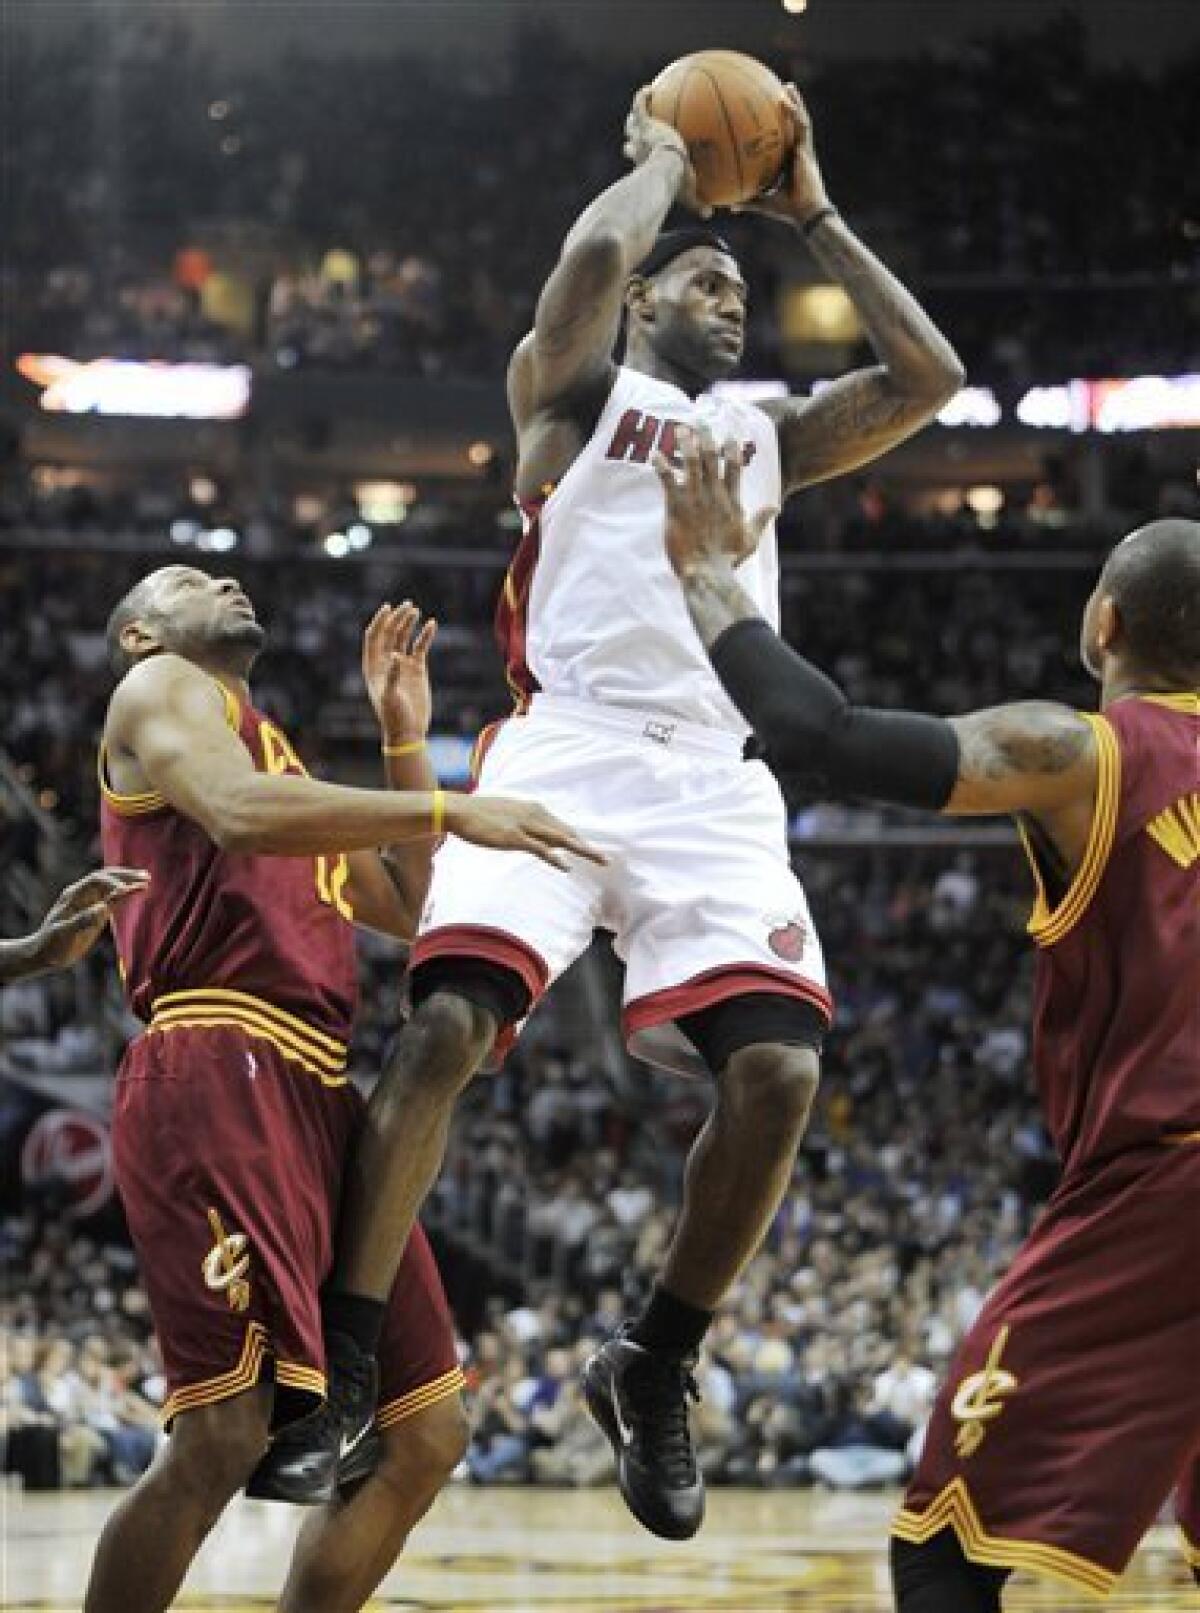 LeBron James: Superstar gets fans ejected from game on return and